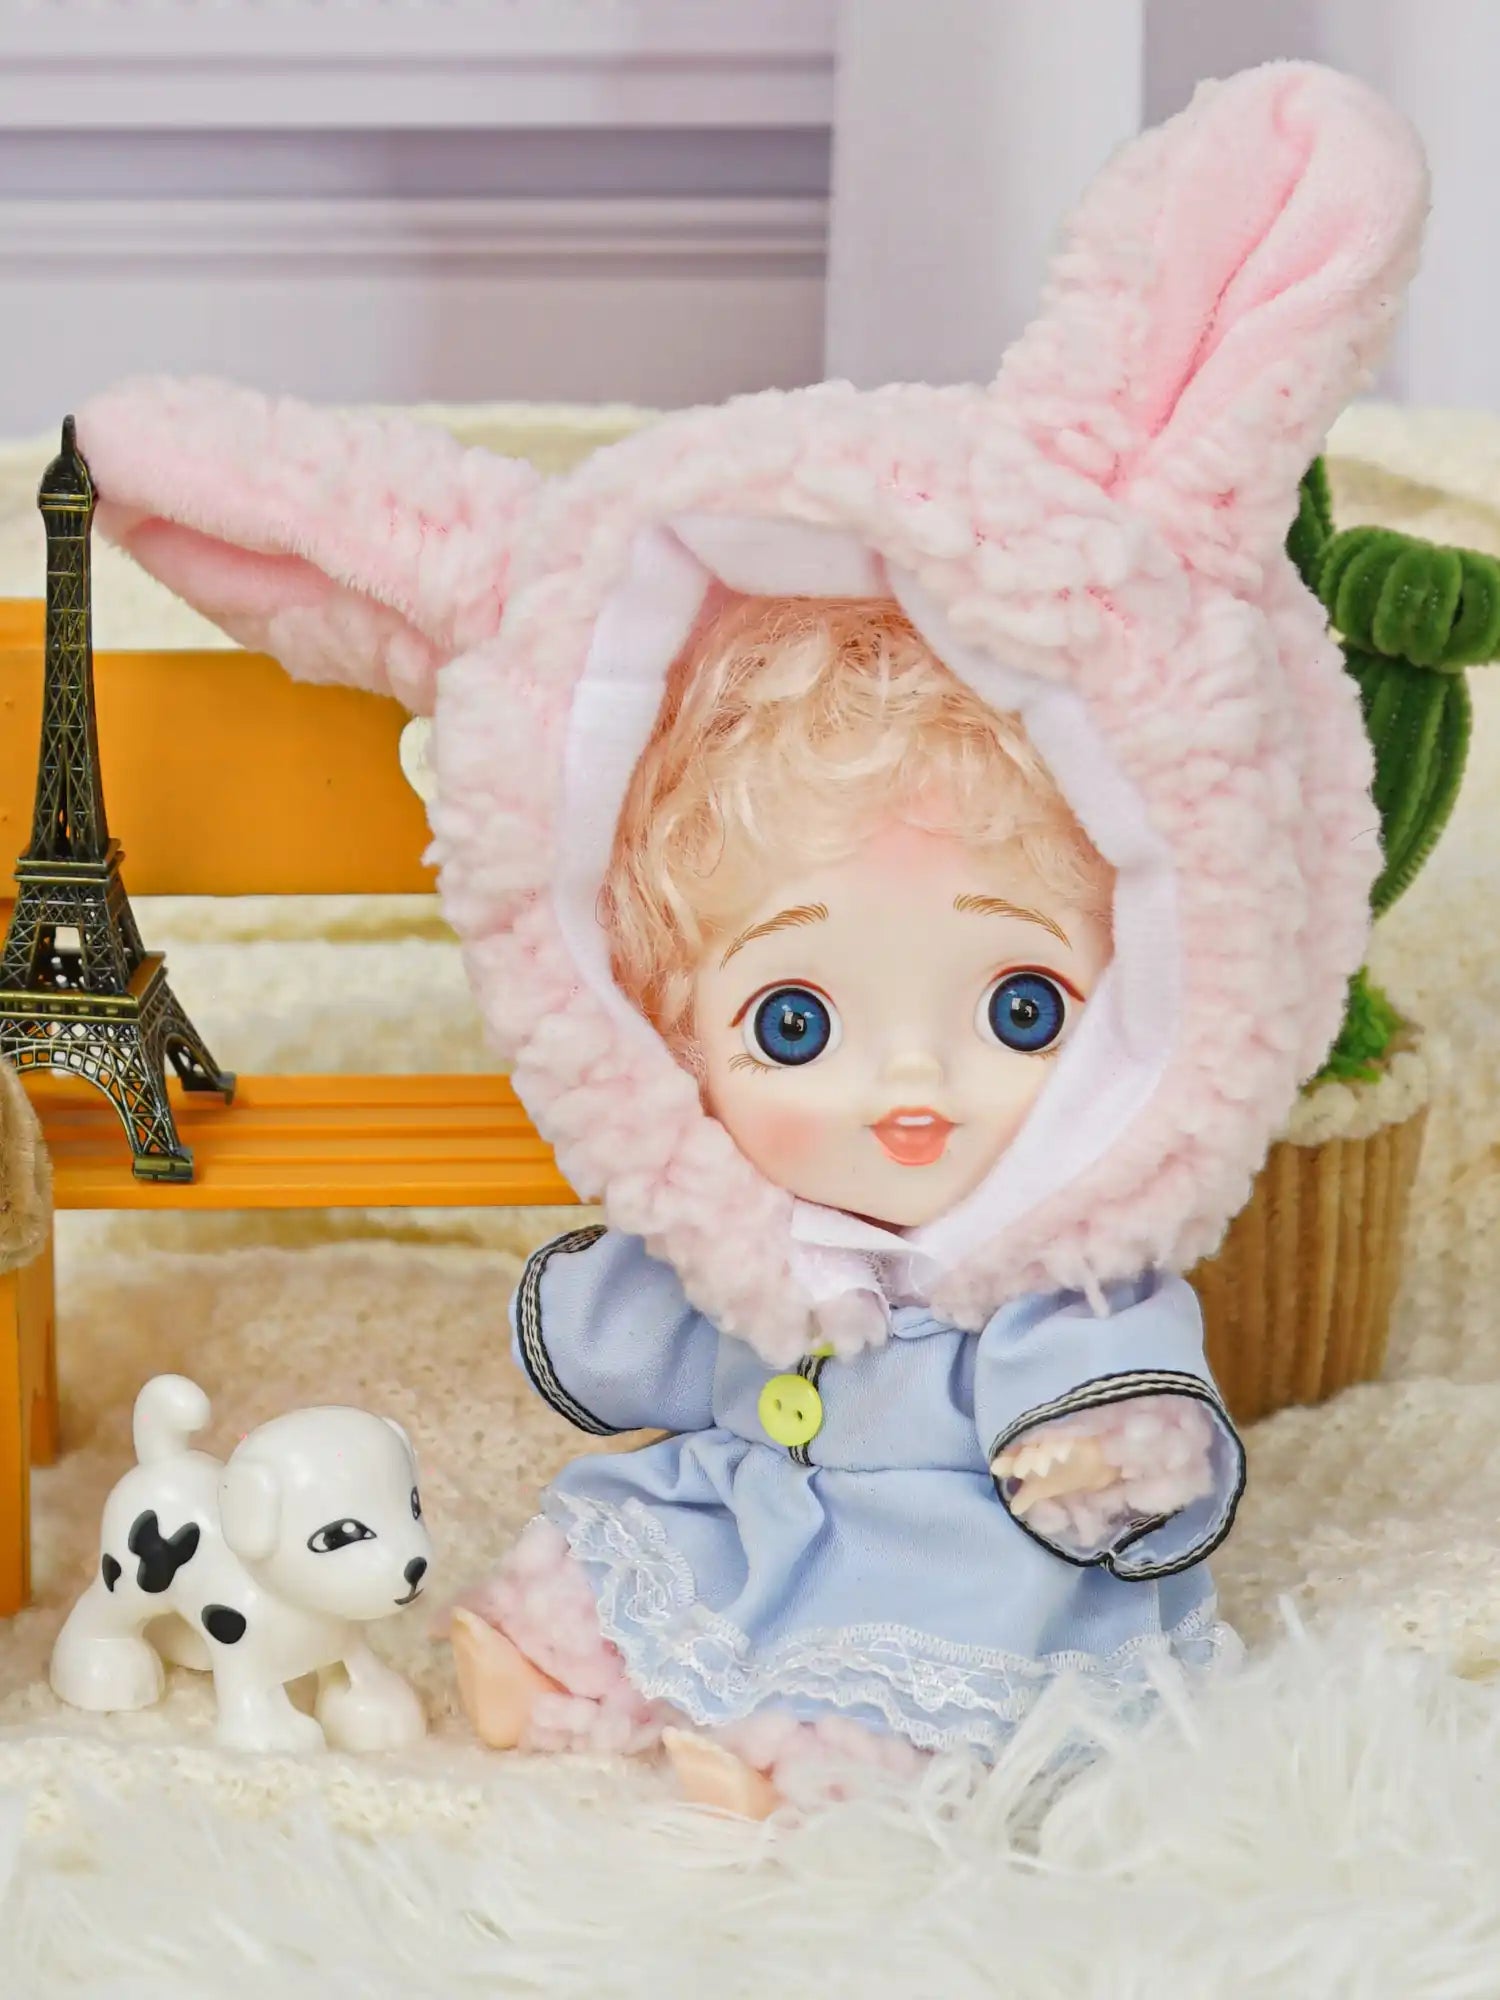 BJD with blue eyes in a rabbit costume alongside a white dog figurine.